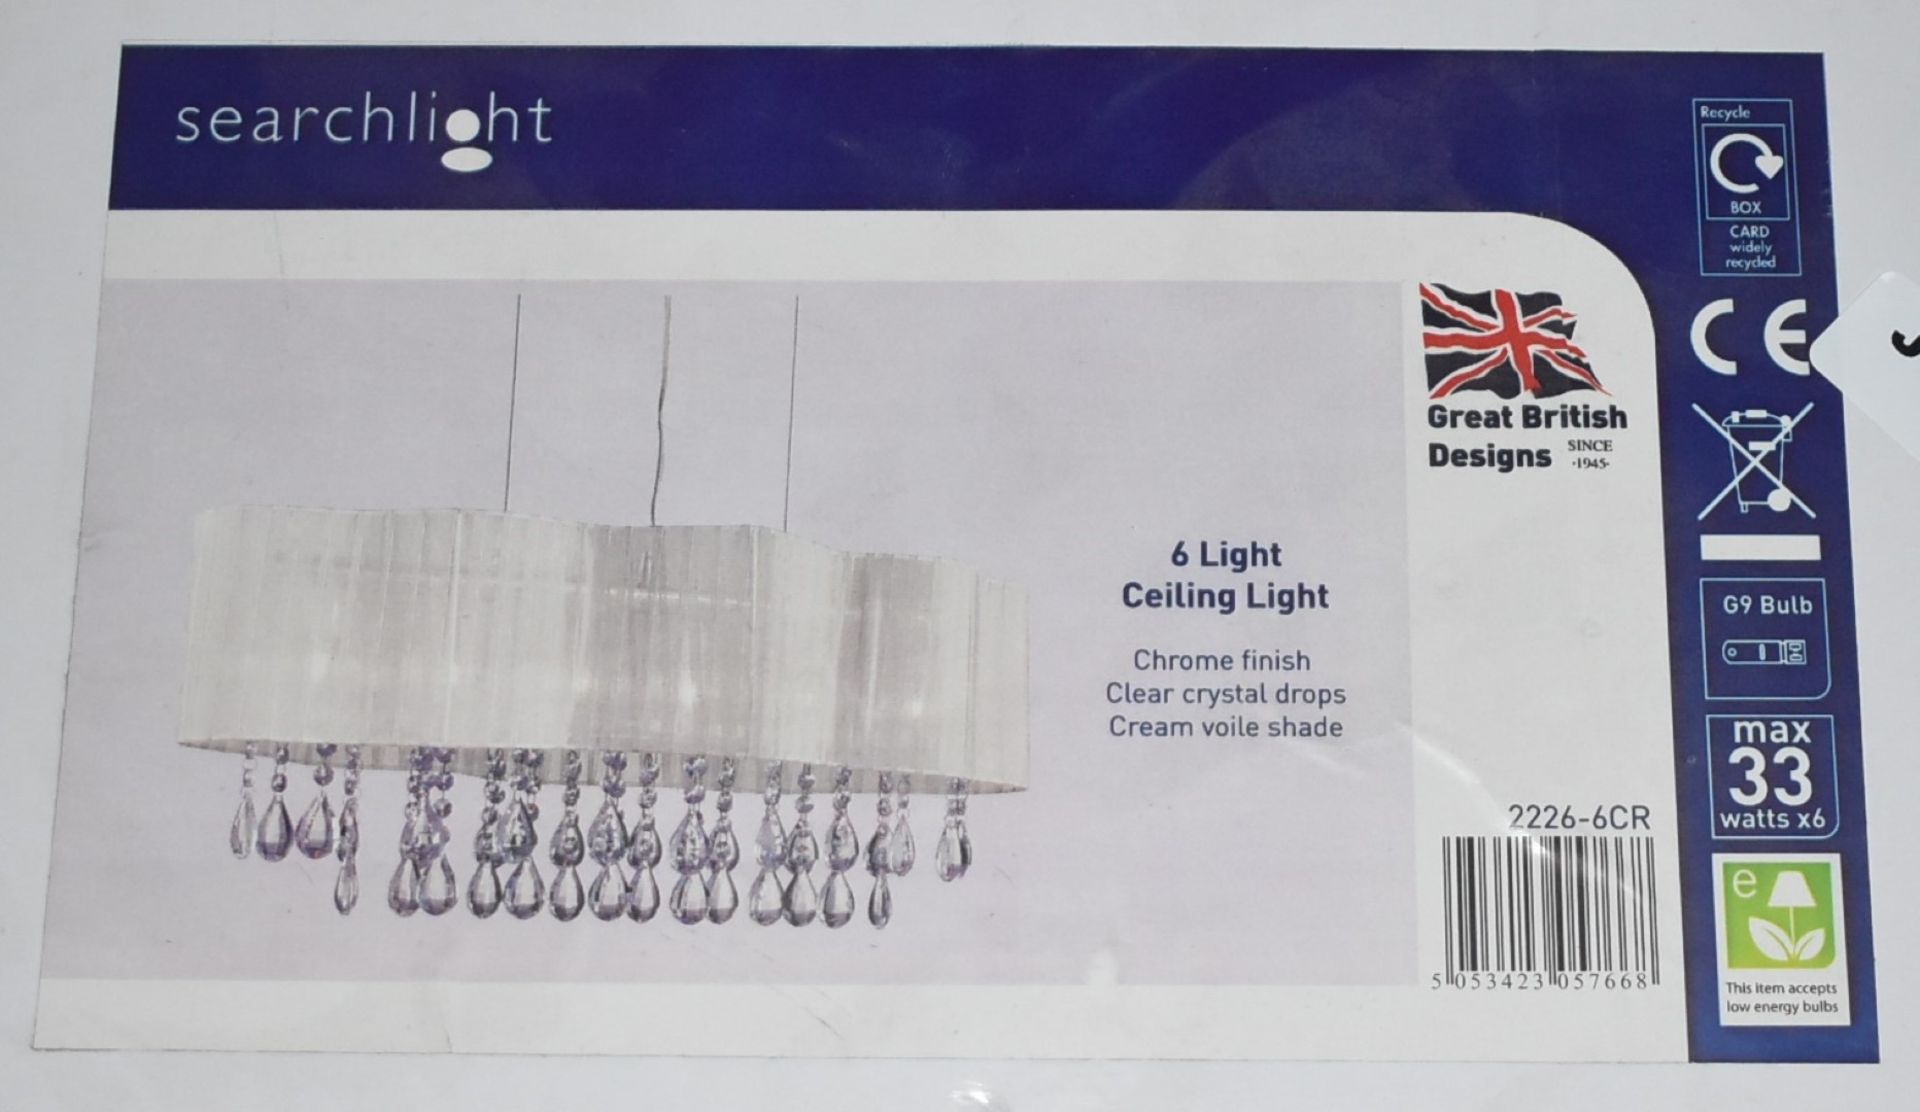 1 x Searchlight 6 Light Ceiling Light - Chrome Finish, Clear Crystal Drops and Cream Voile Shade - Image 3 of 5